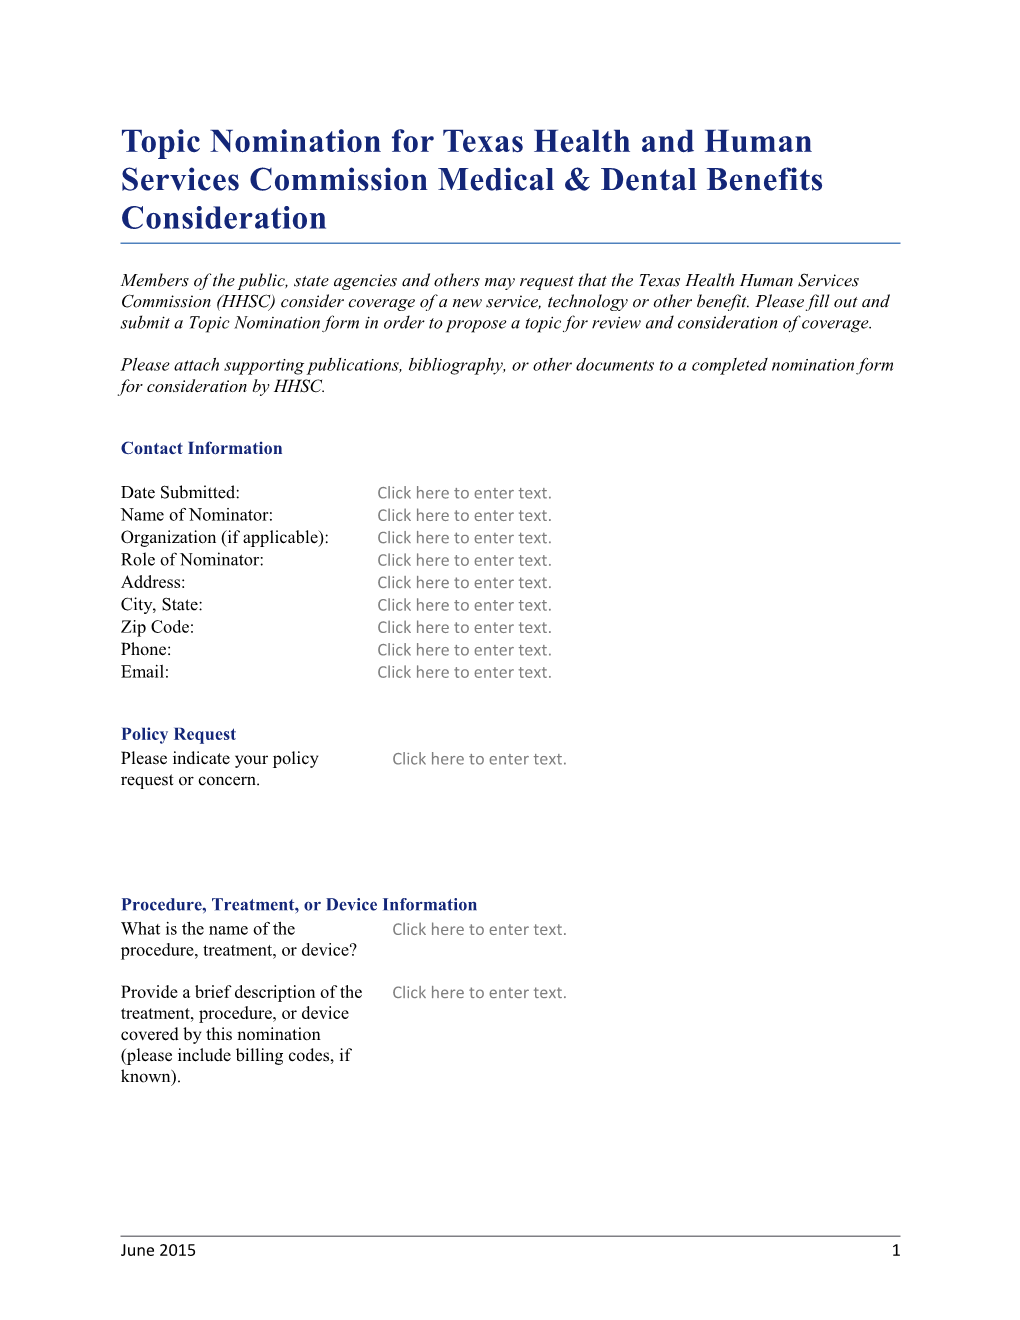 Topic Nomination for Texas Health and Human Services Commission Medical & Dental Benefits